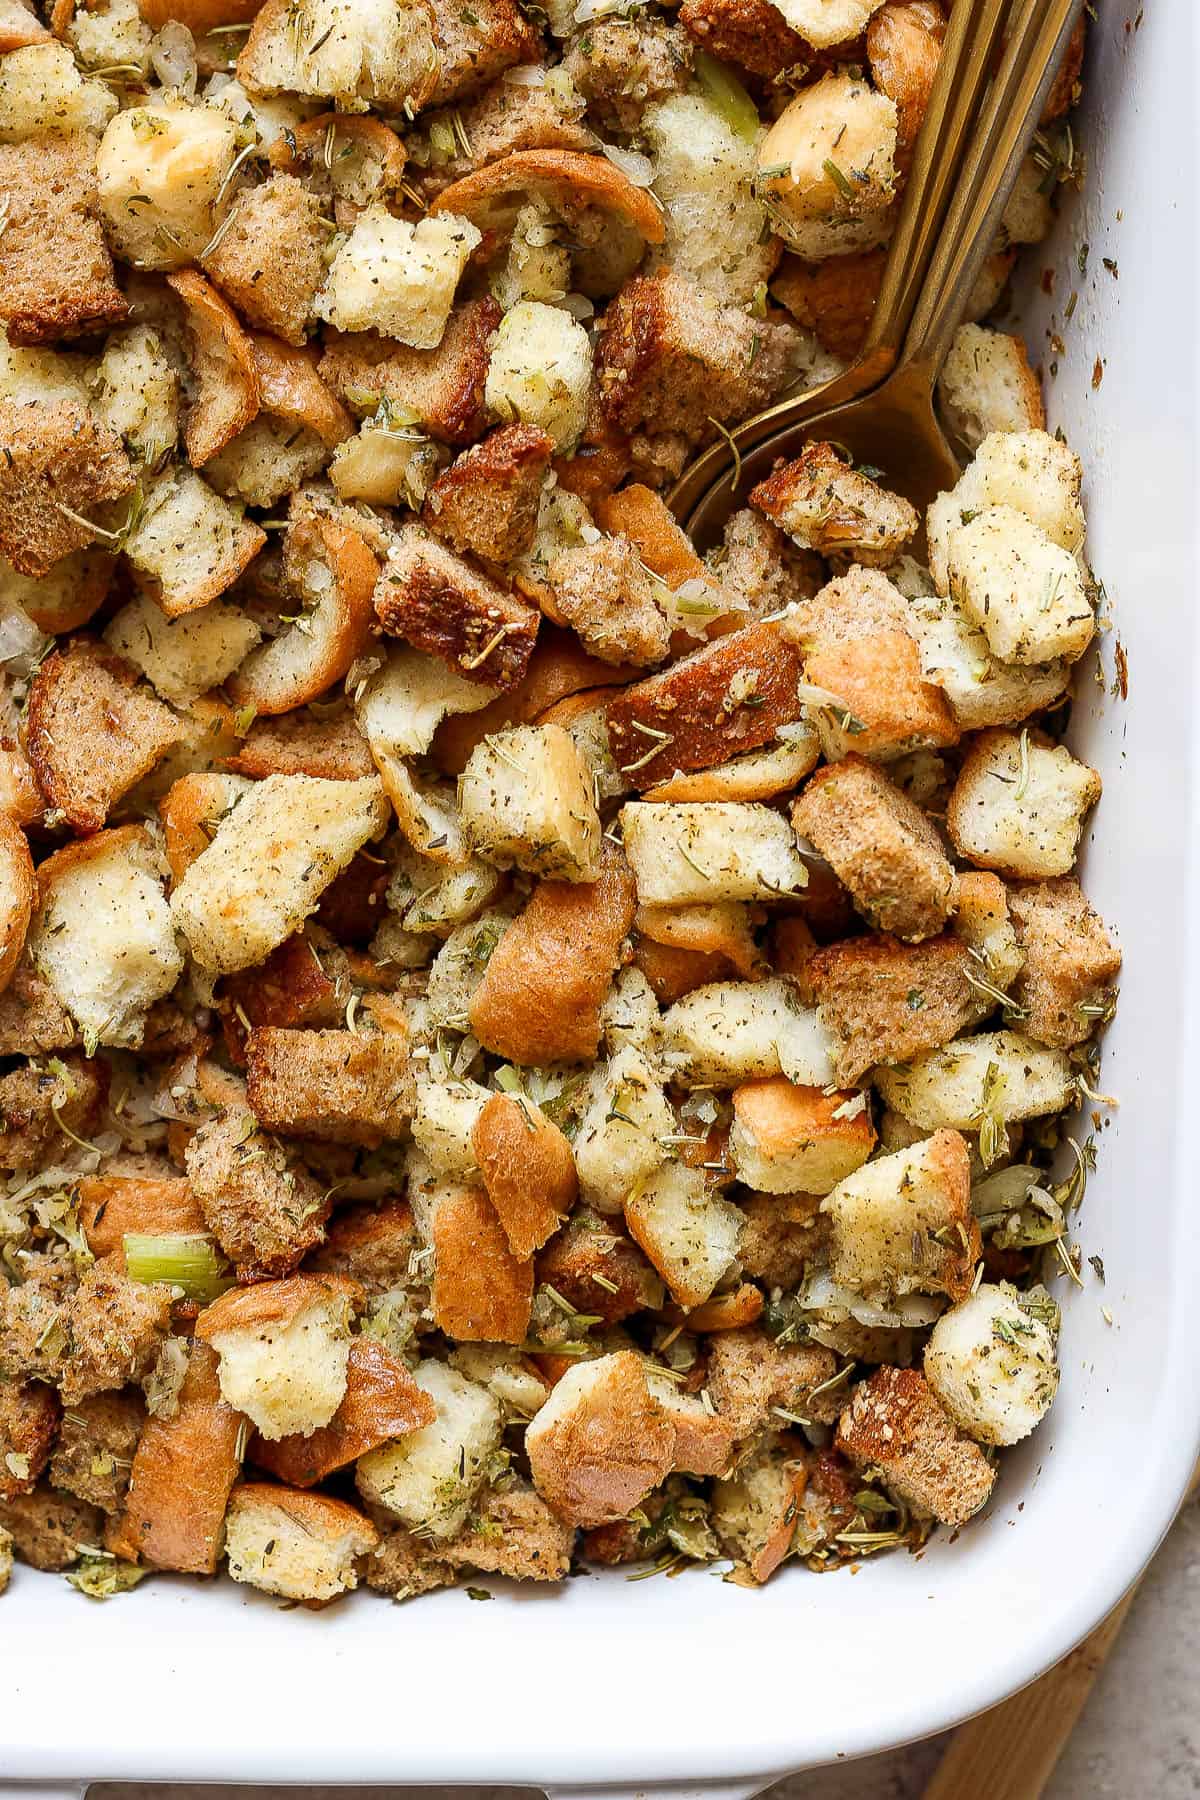 The absolute best recipe for homemade stuffing.